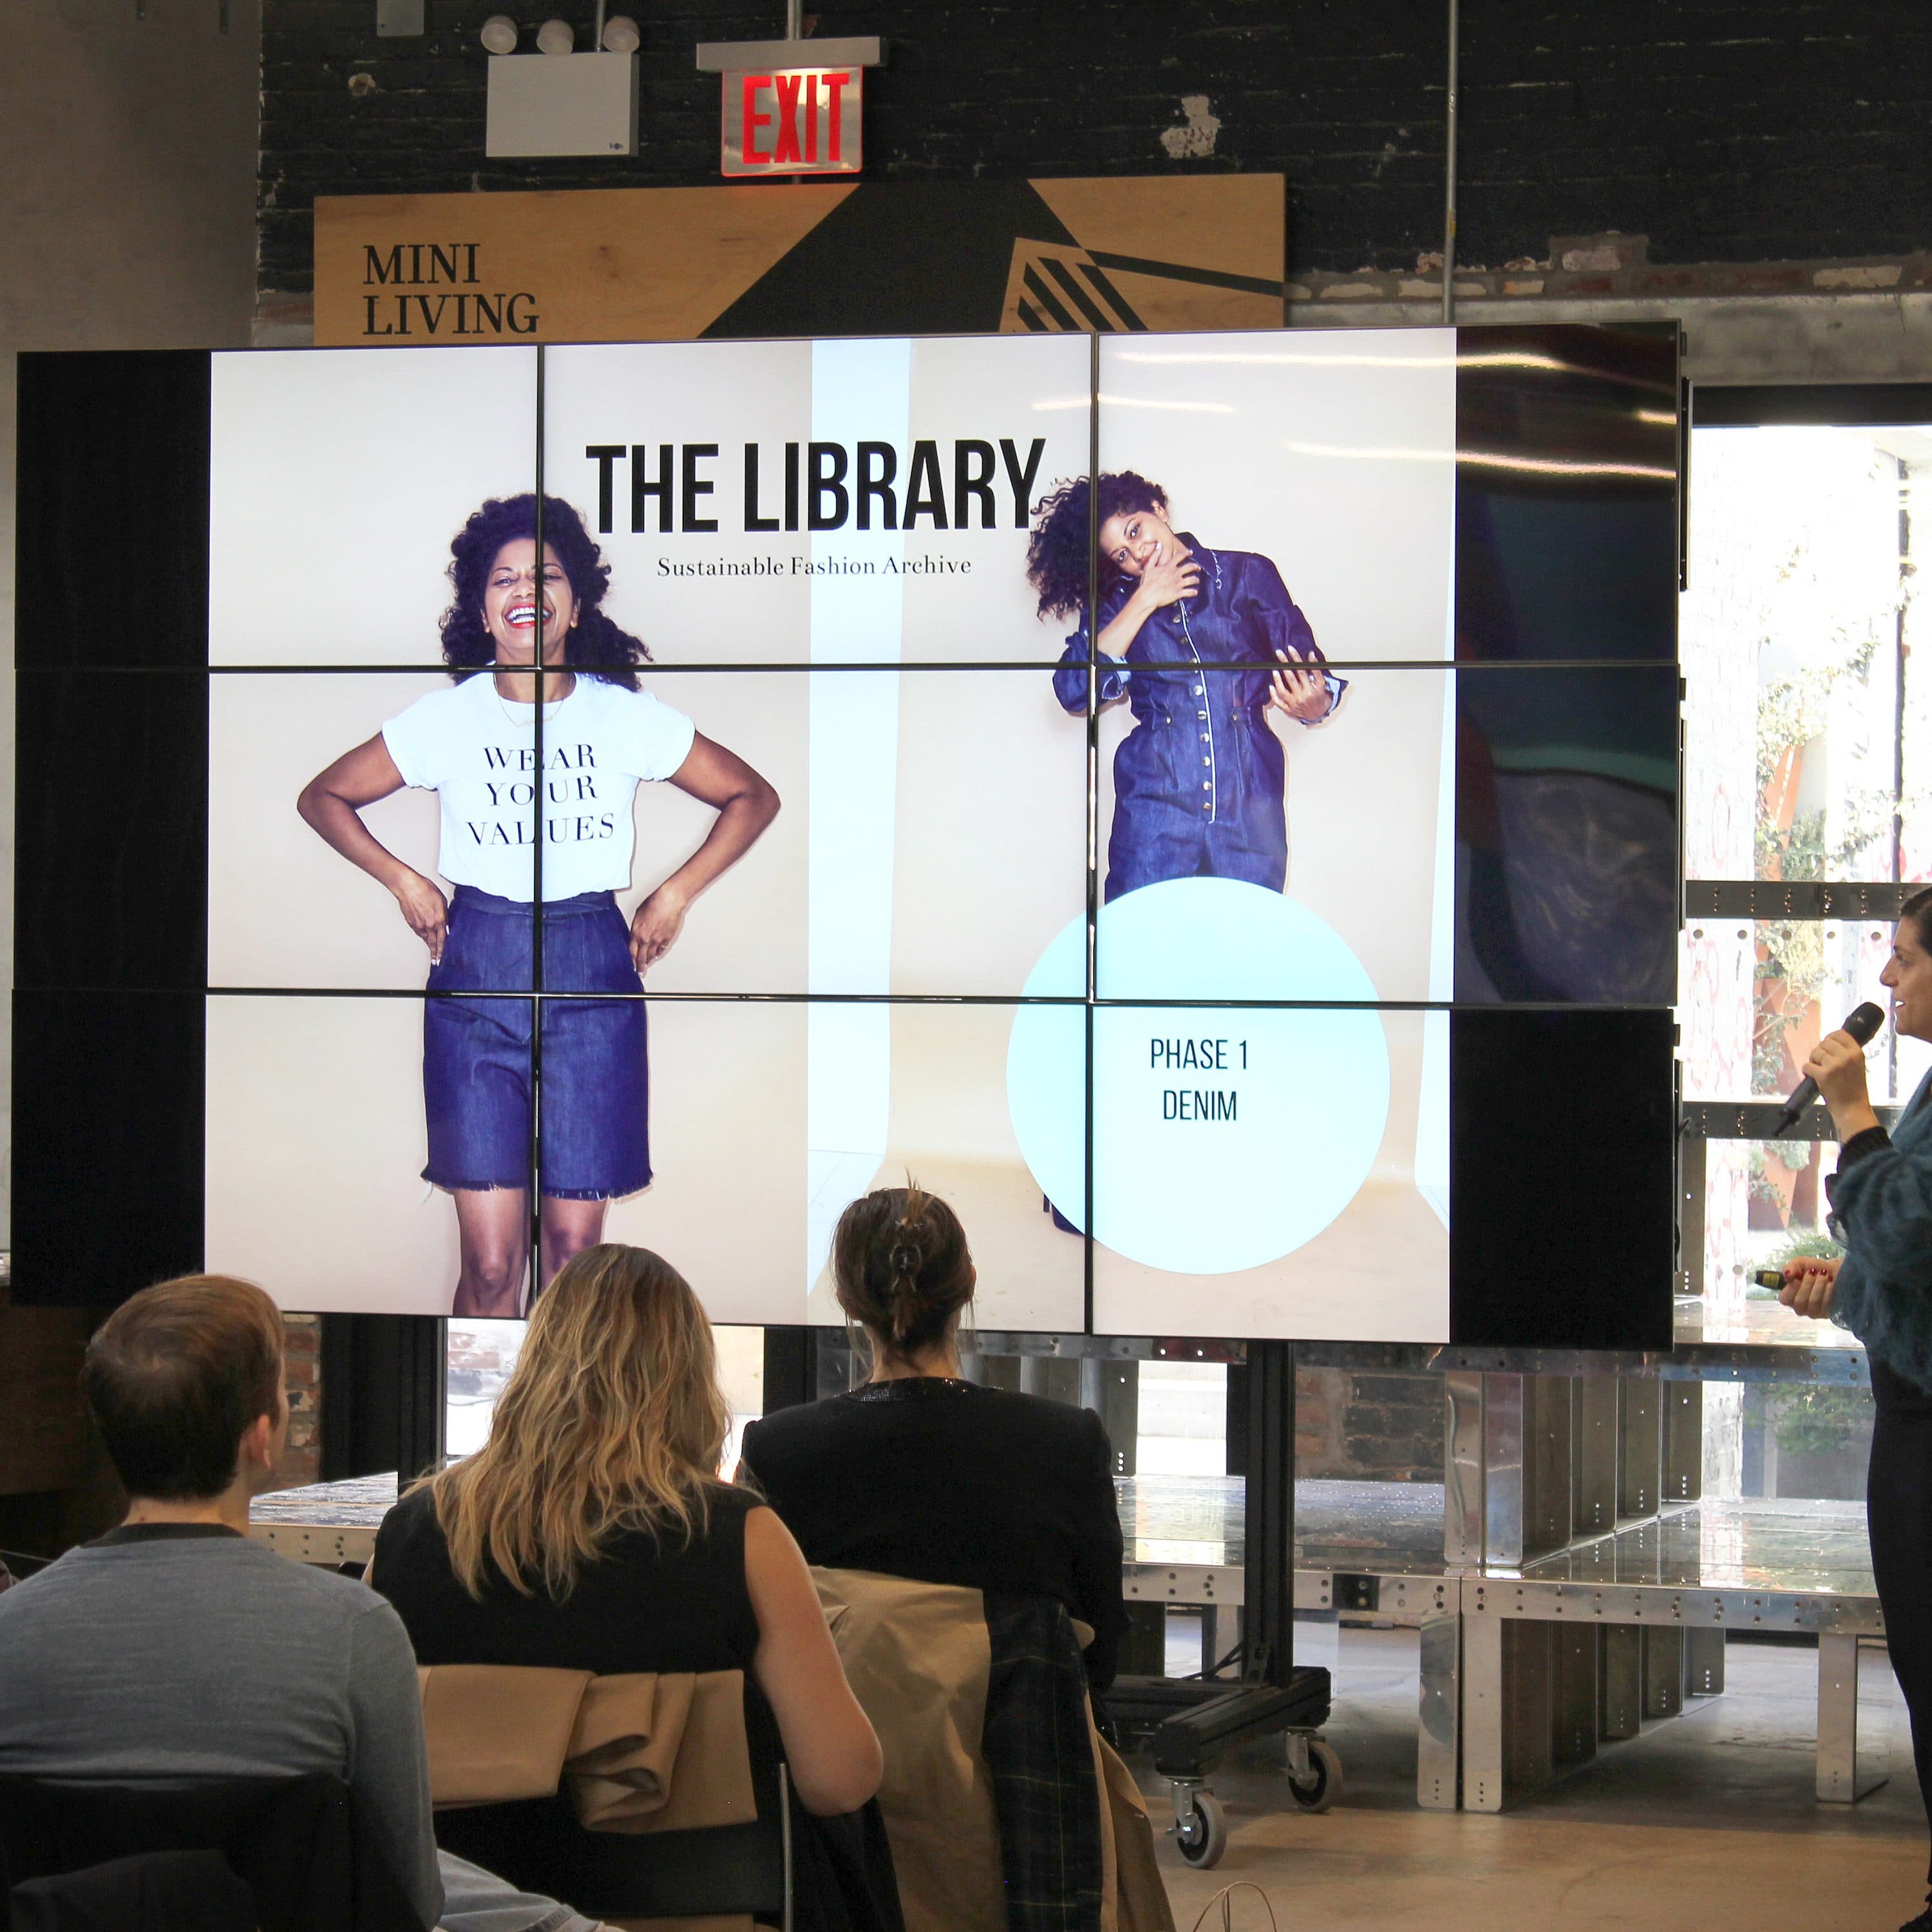 A woman is presenting in front of an audience with a microphone, pointing to a large screen displaying an image of a person wearing a denim outfit. The screen reads: "The Library: Sustainable Fashion Archive" with the text "Phase 1 Denim." The audience is seated and attentive.